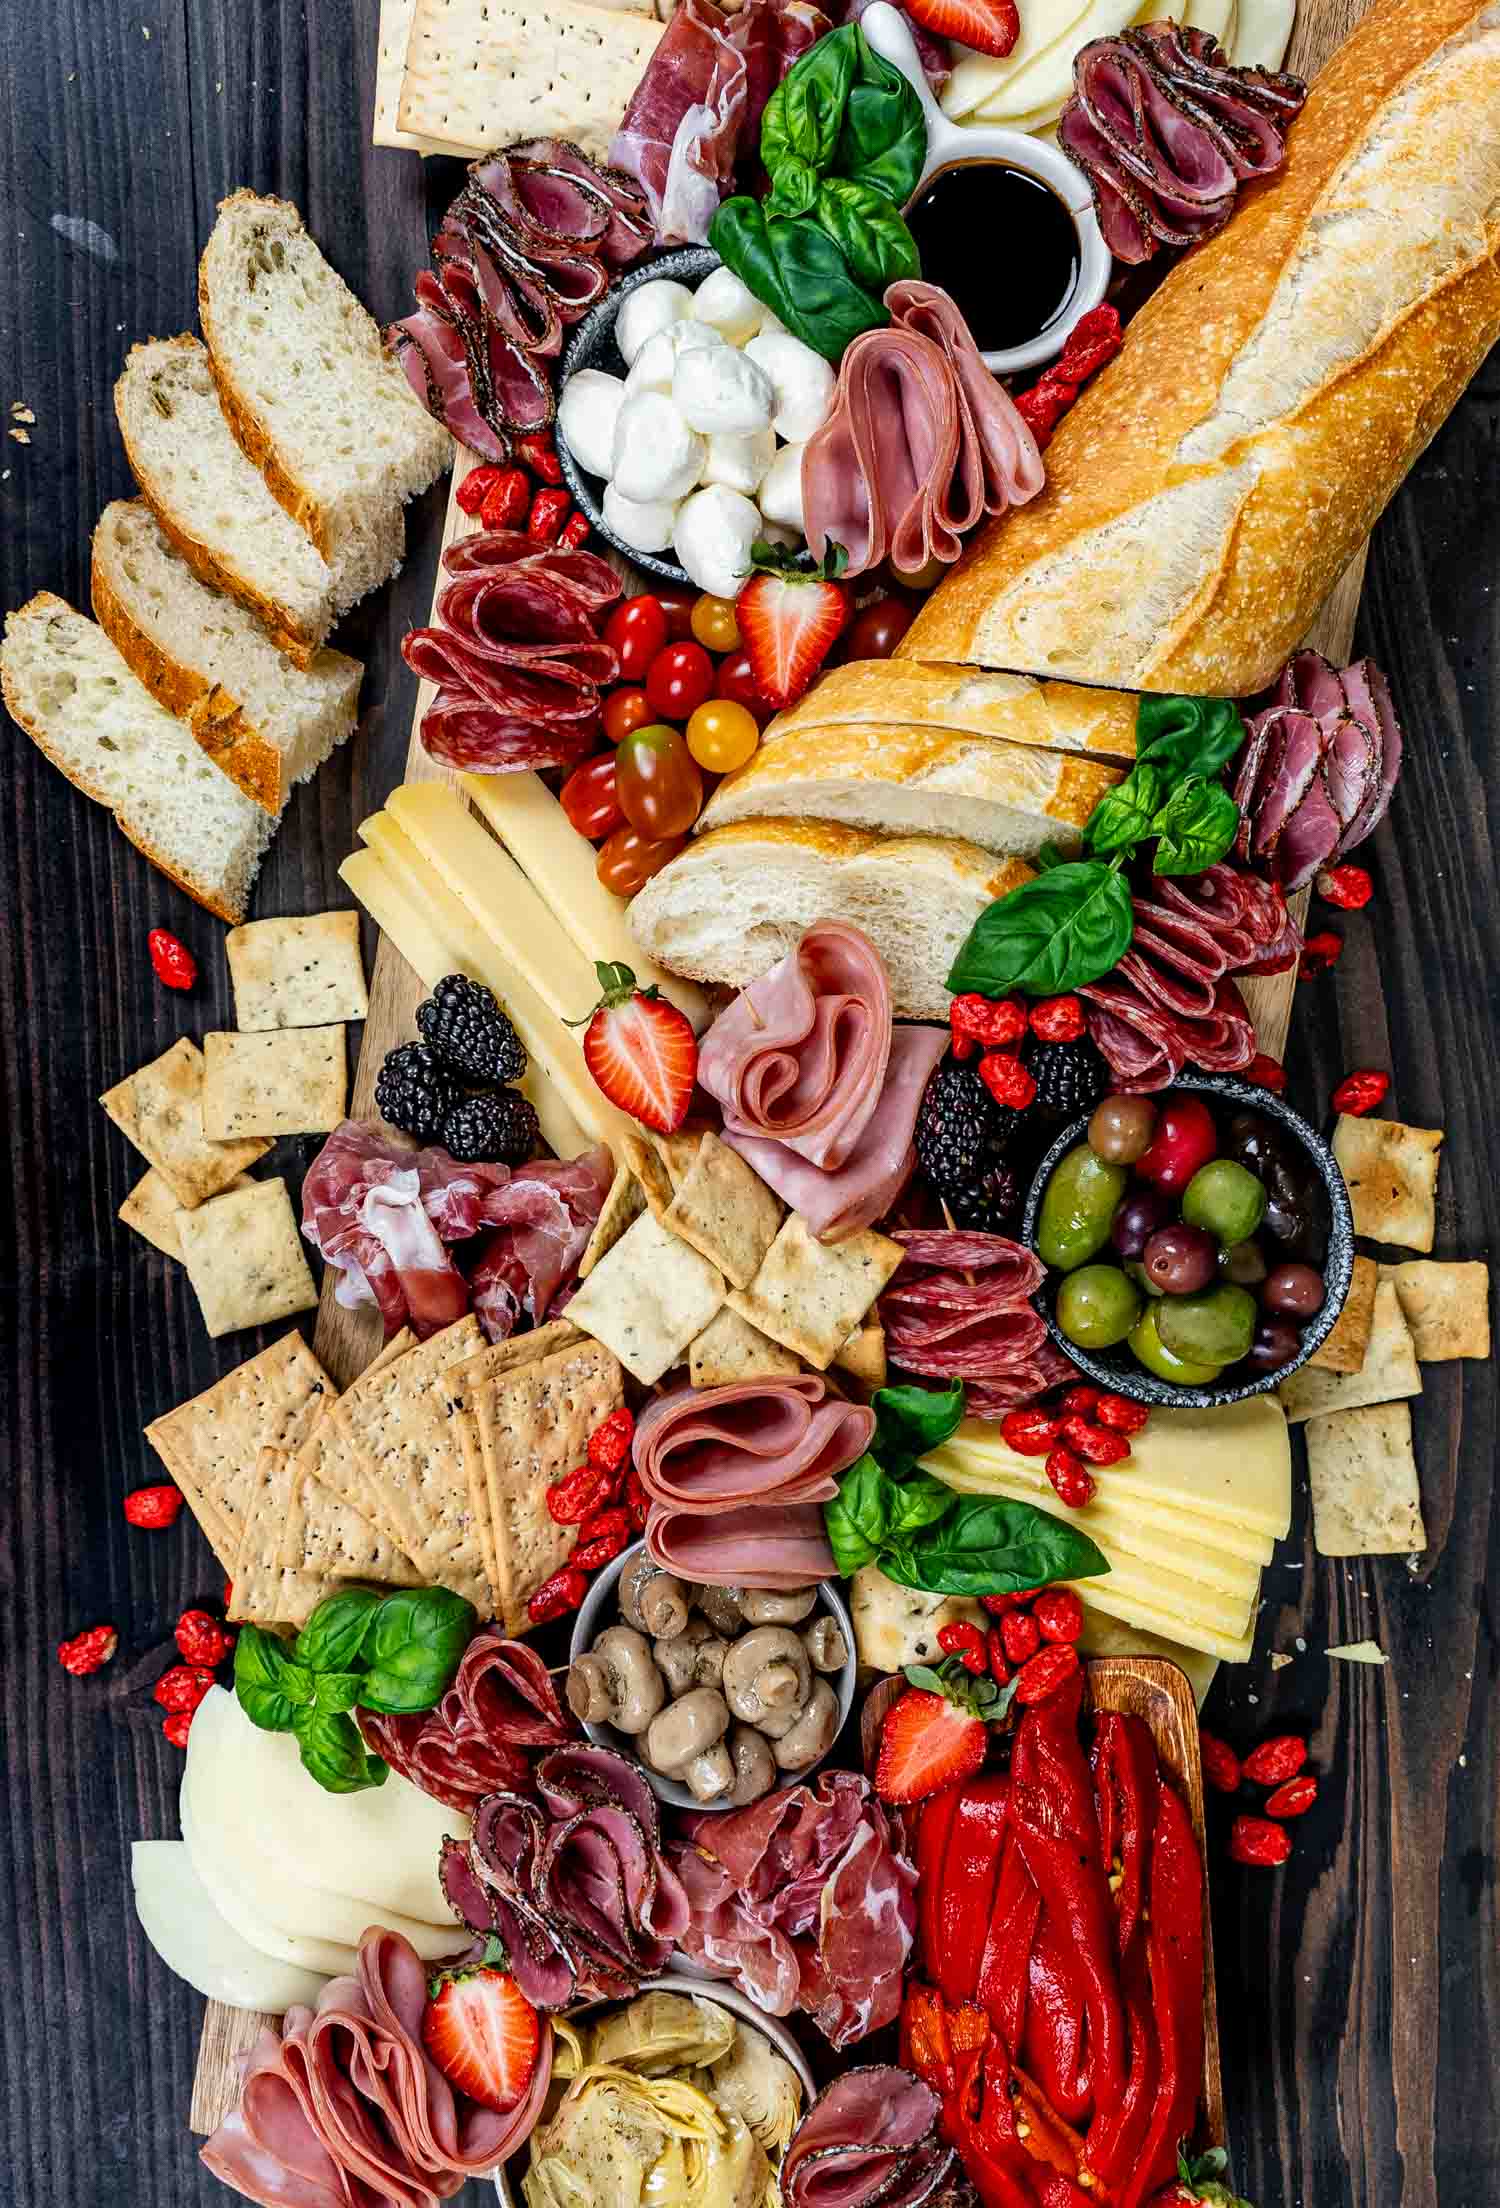 How To Make A Charcuterie Board - Jo Cooks